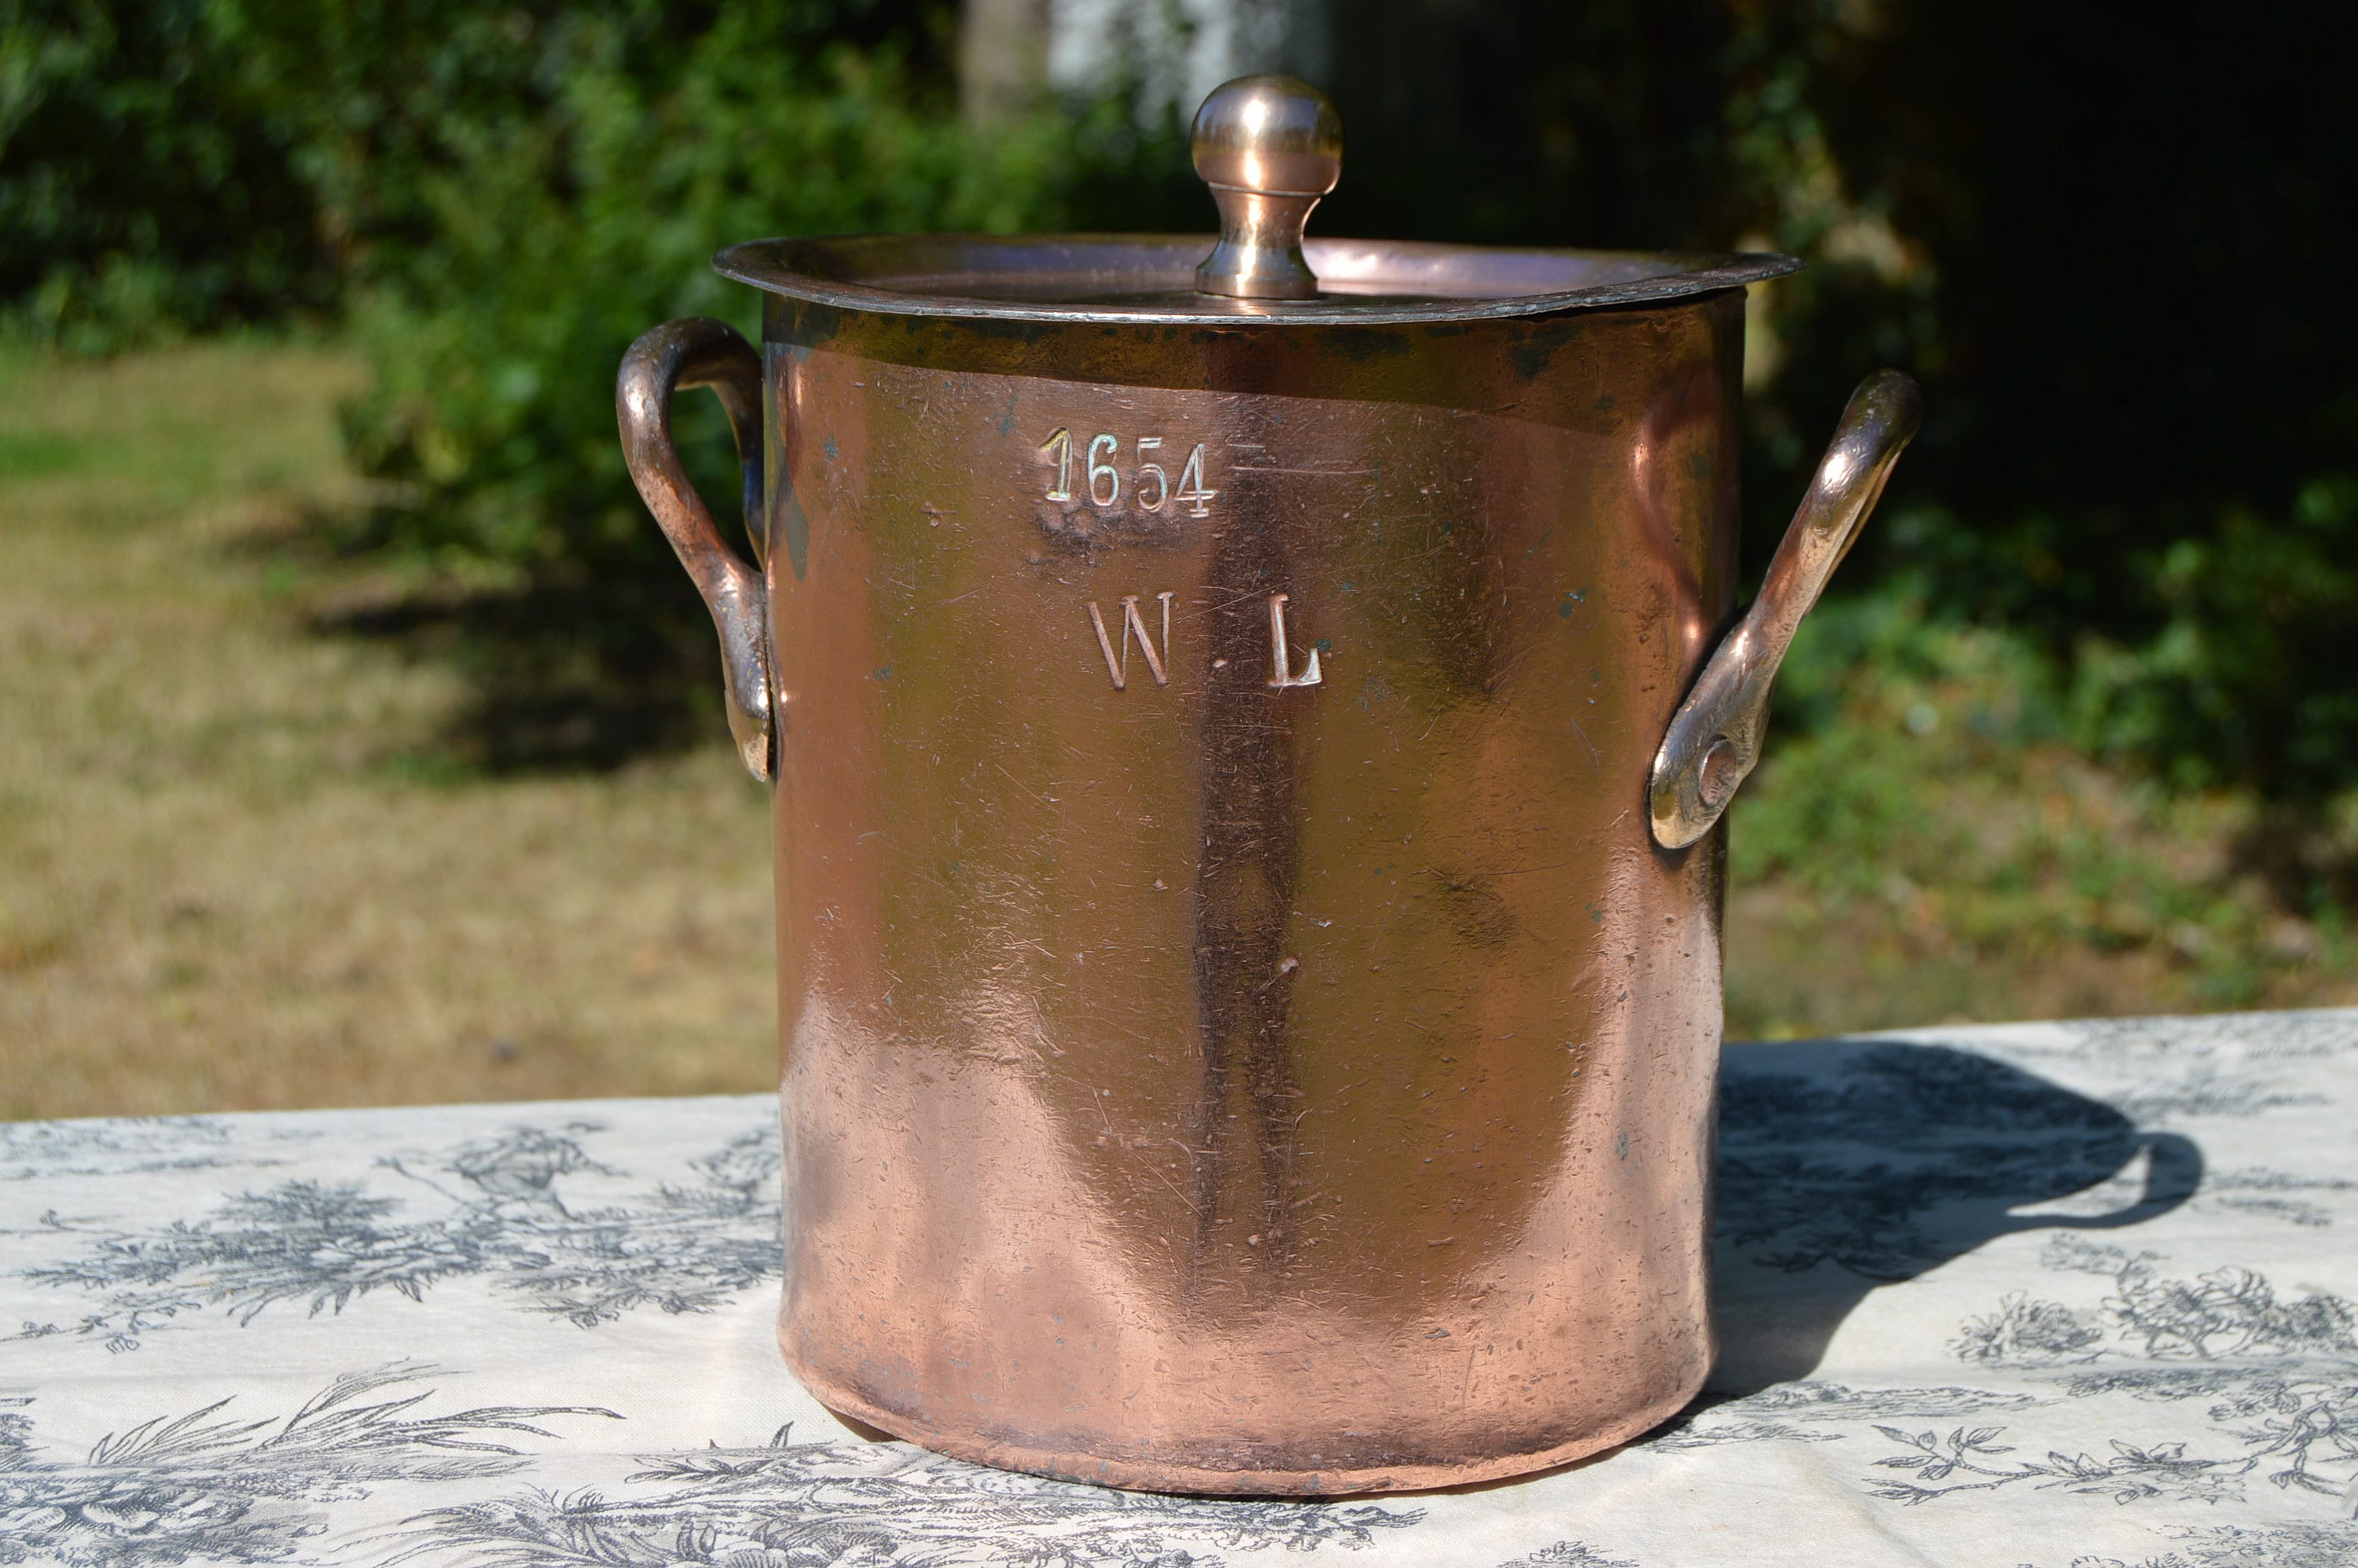 A Nice Large French Copper Fish Pan Saute Pan Stamped E Dehillerin / Made  in France Tin Lined With Bronze Handle Nice in A Country Kitchen 